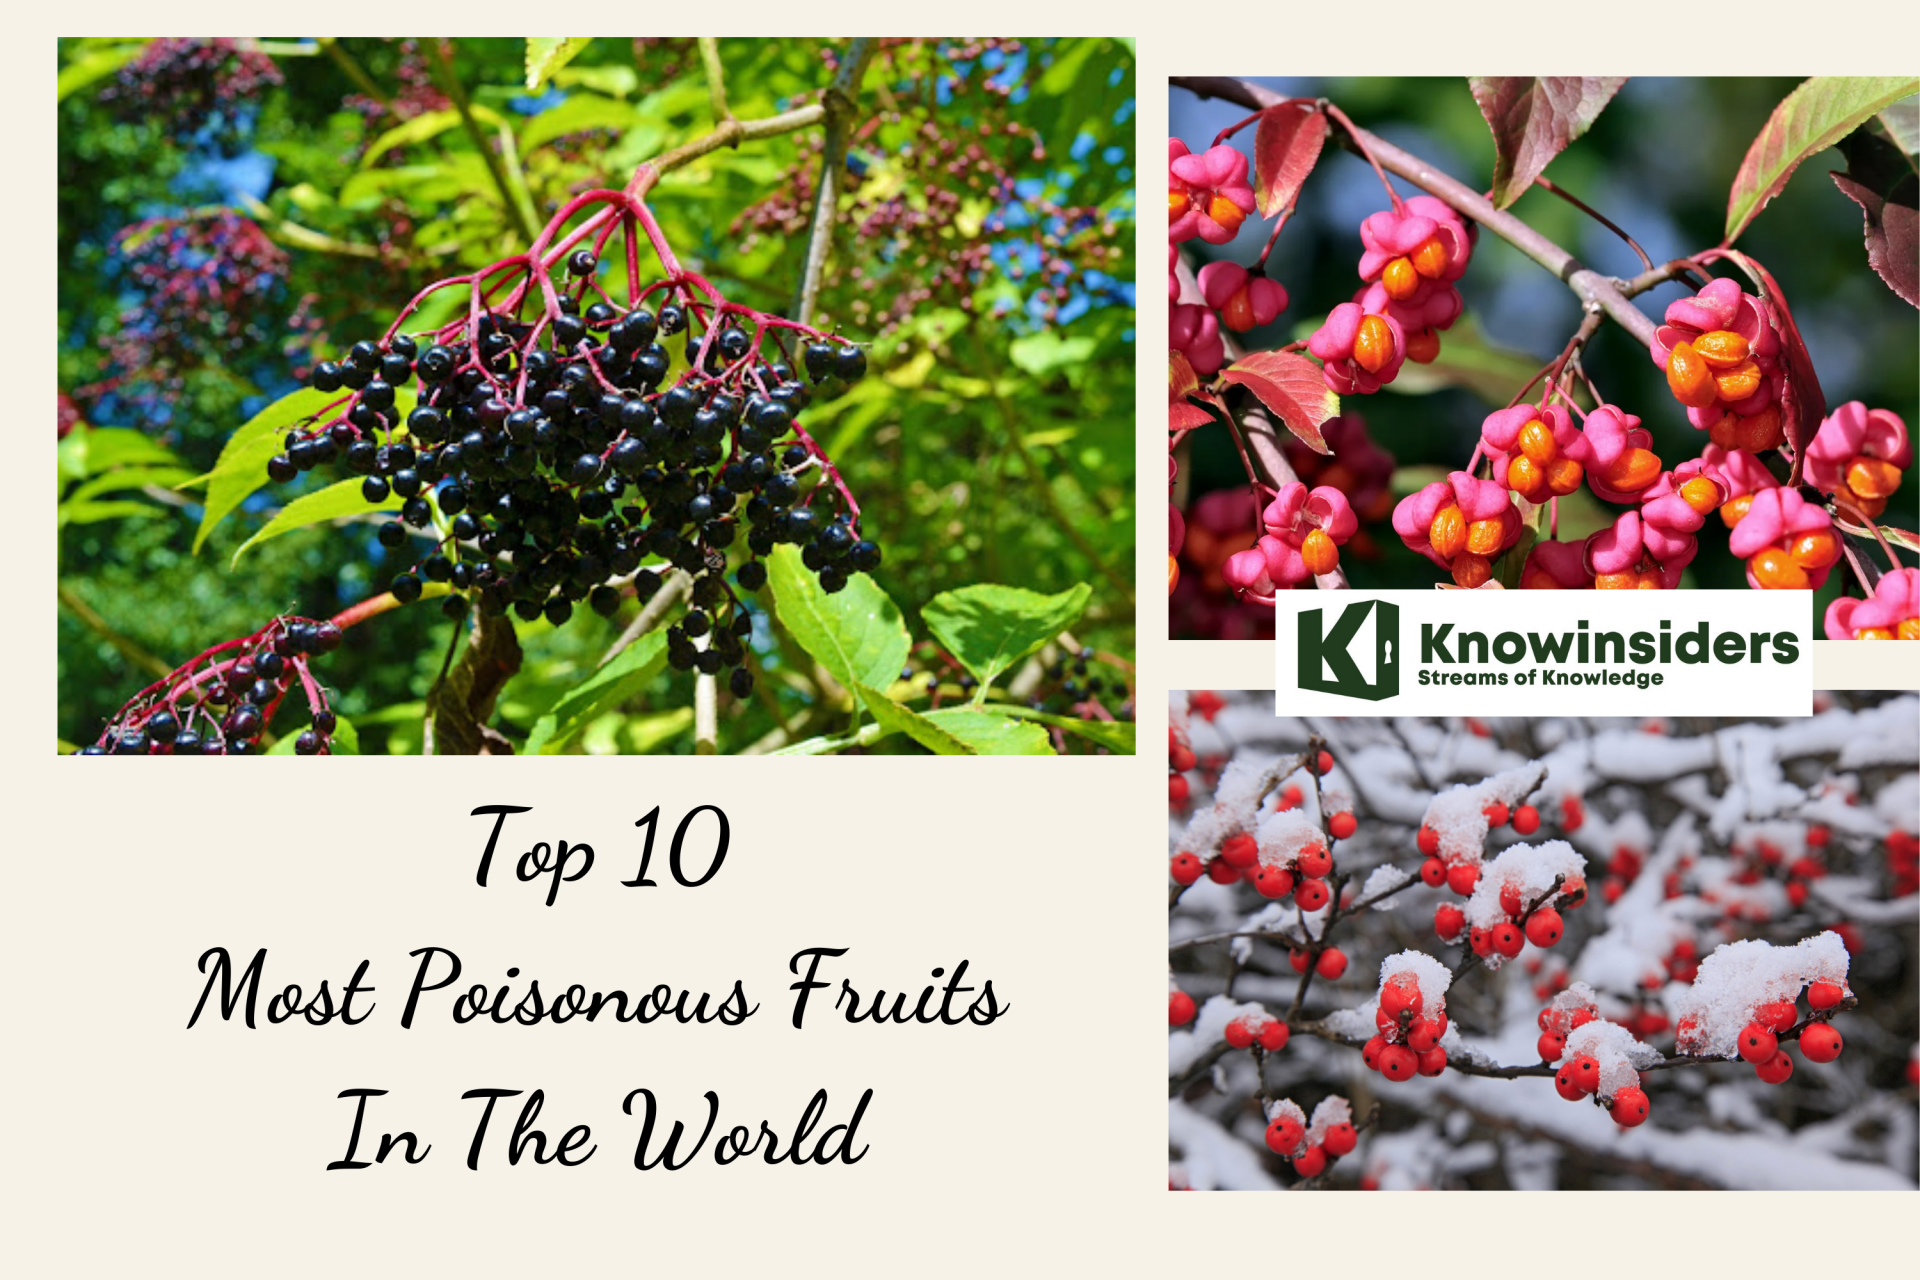 Top 10 Most Poisonous Fruits In The World